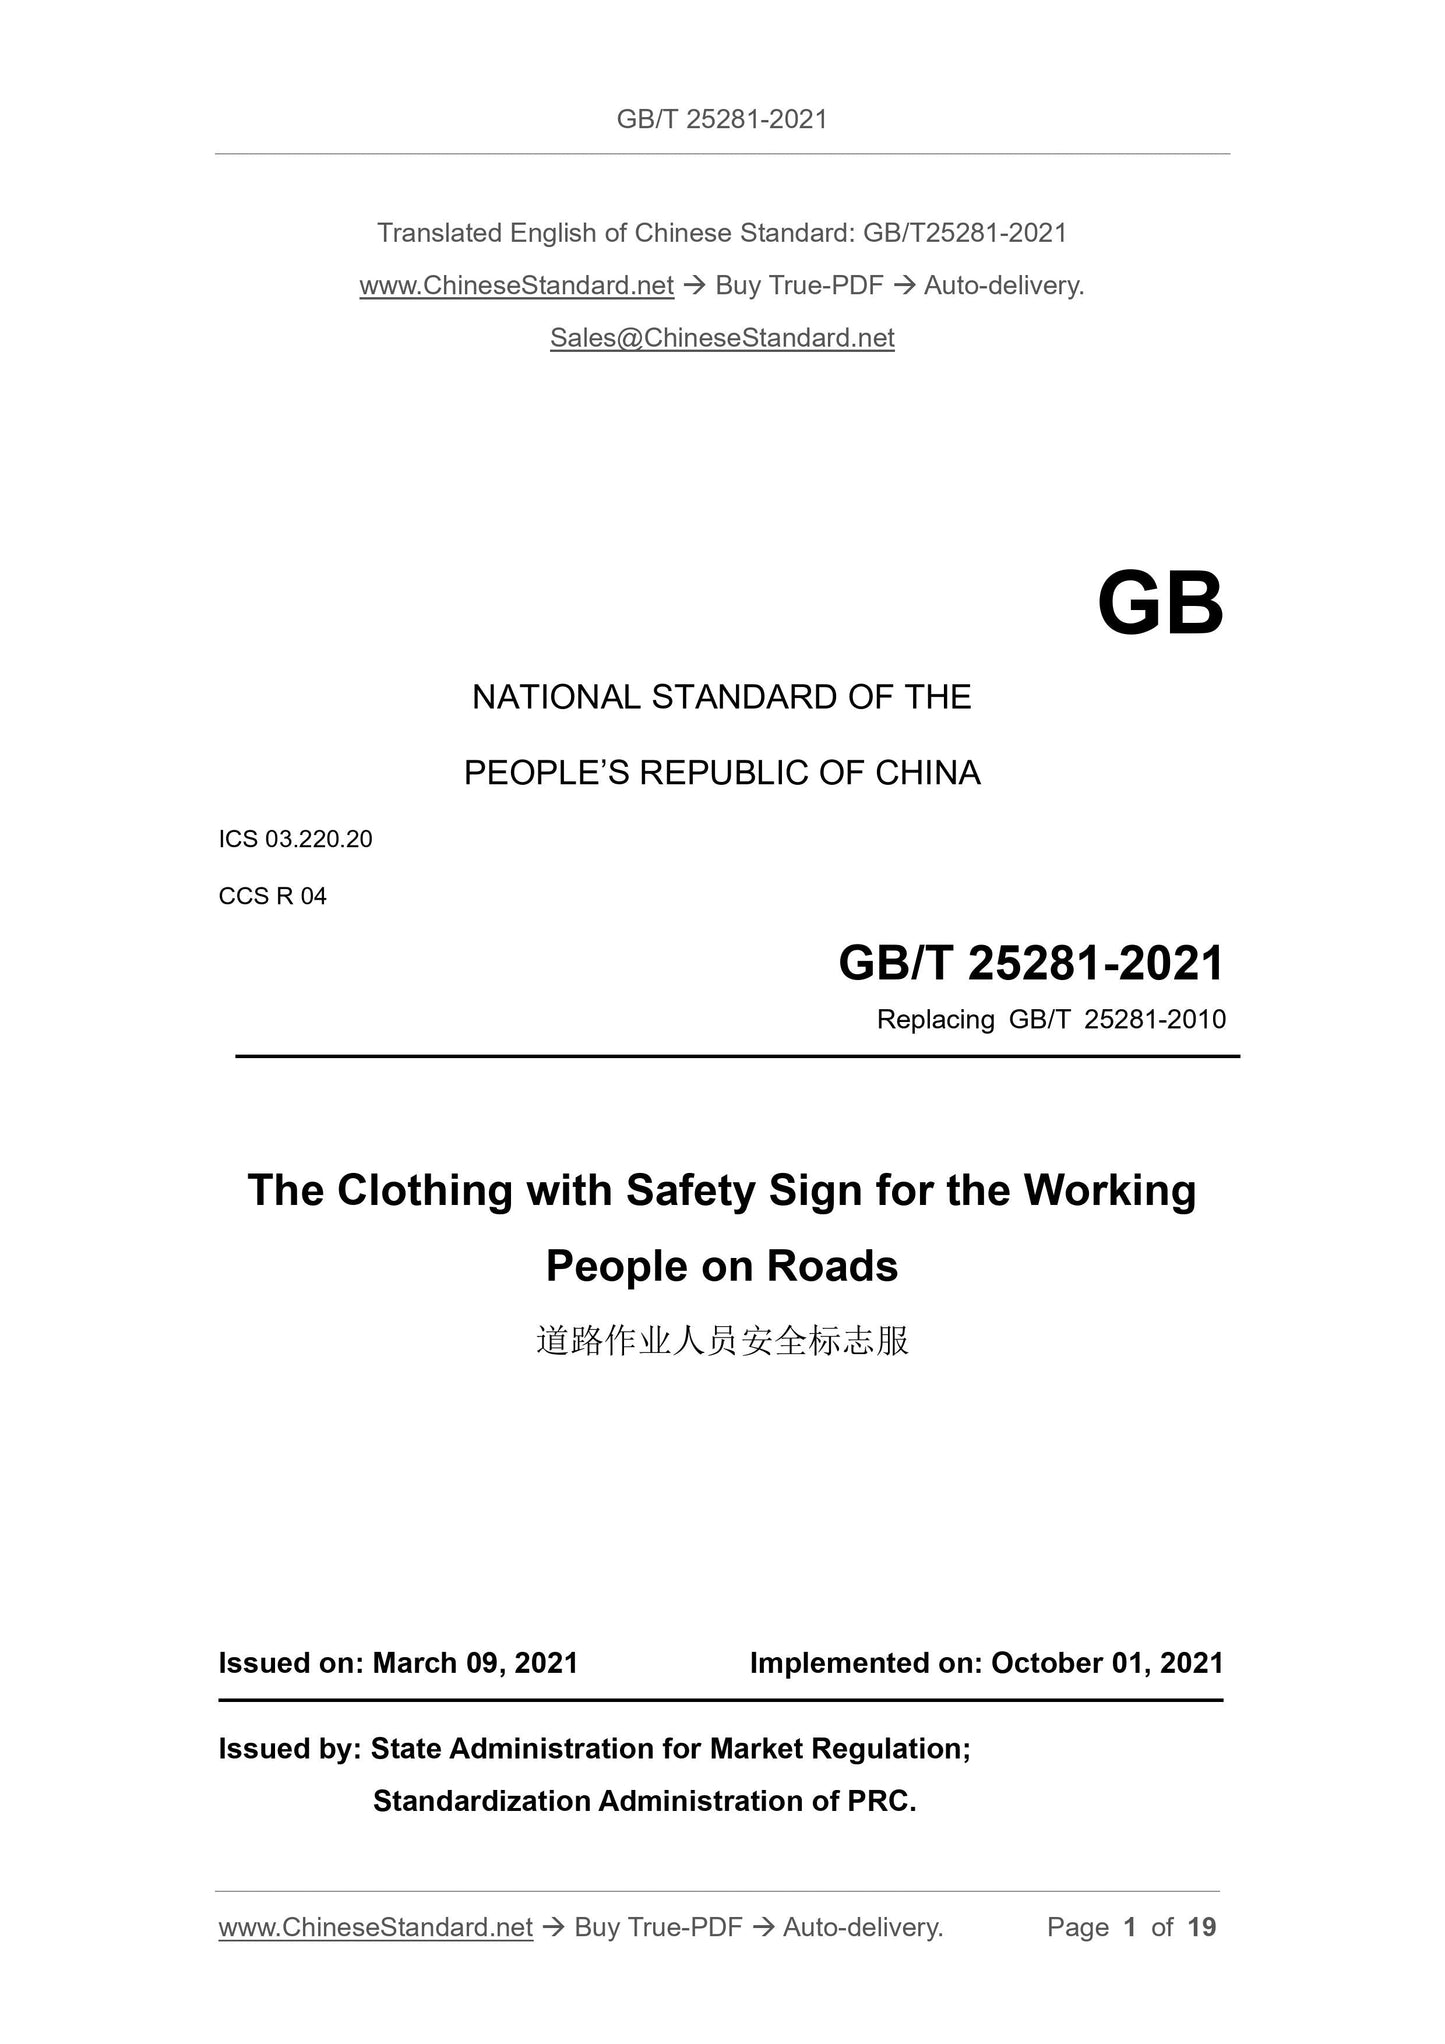 GB/T 25281-2021 Page 1